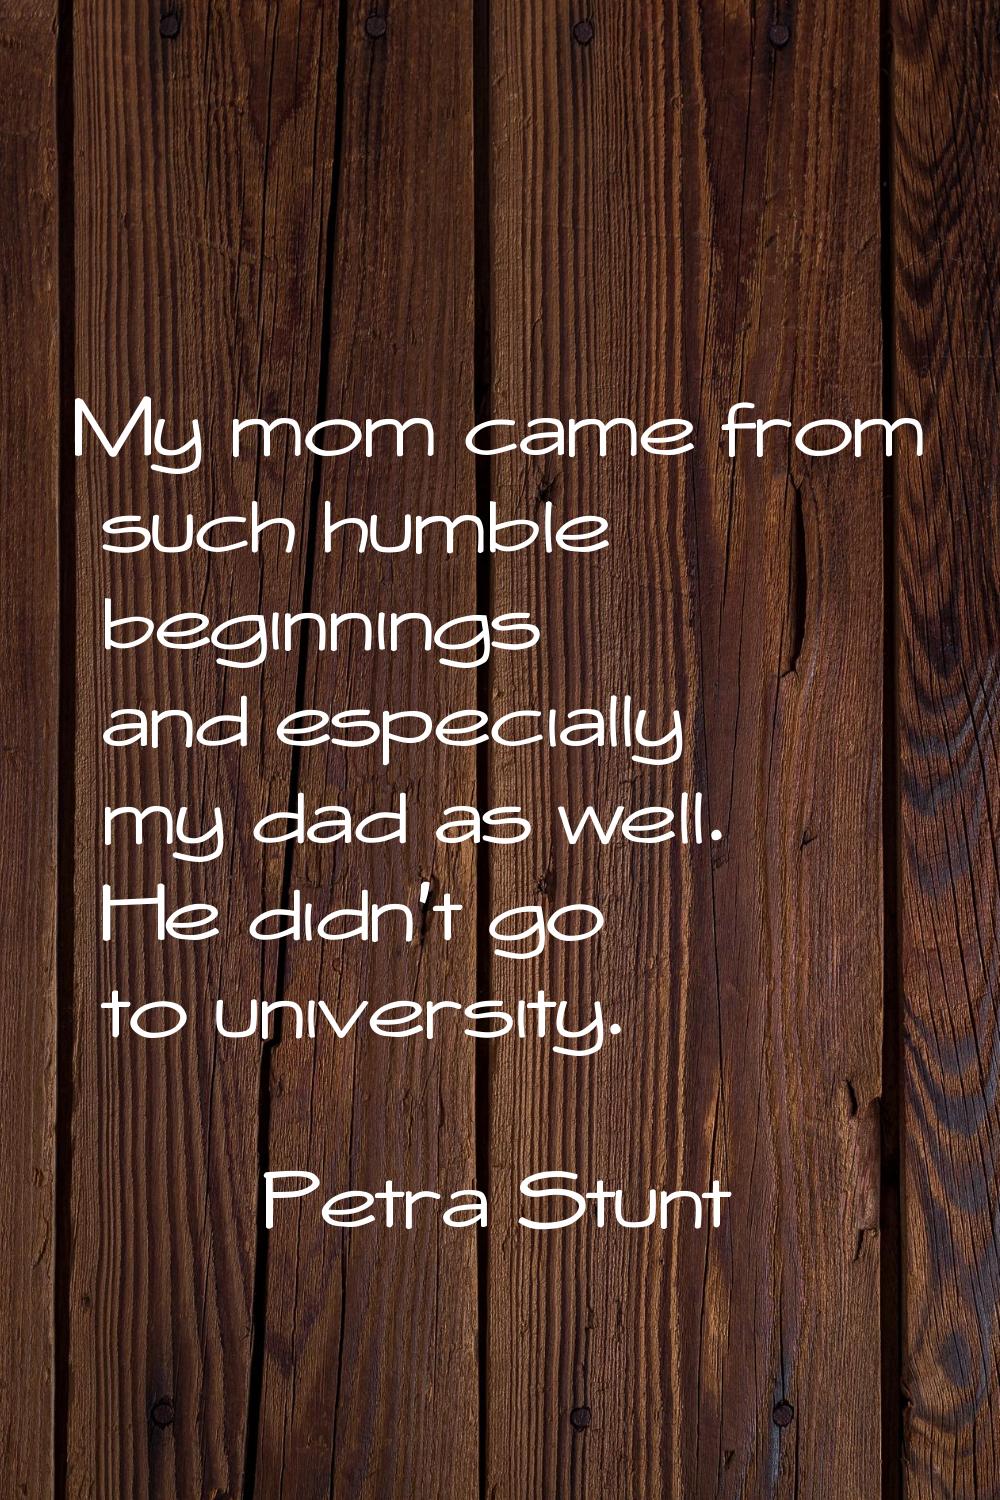 My mom came from such humble beginnings and especially my dad as well. He didn't go to university.